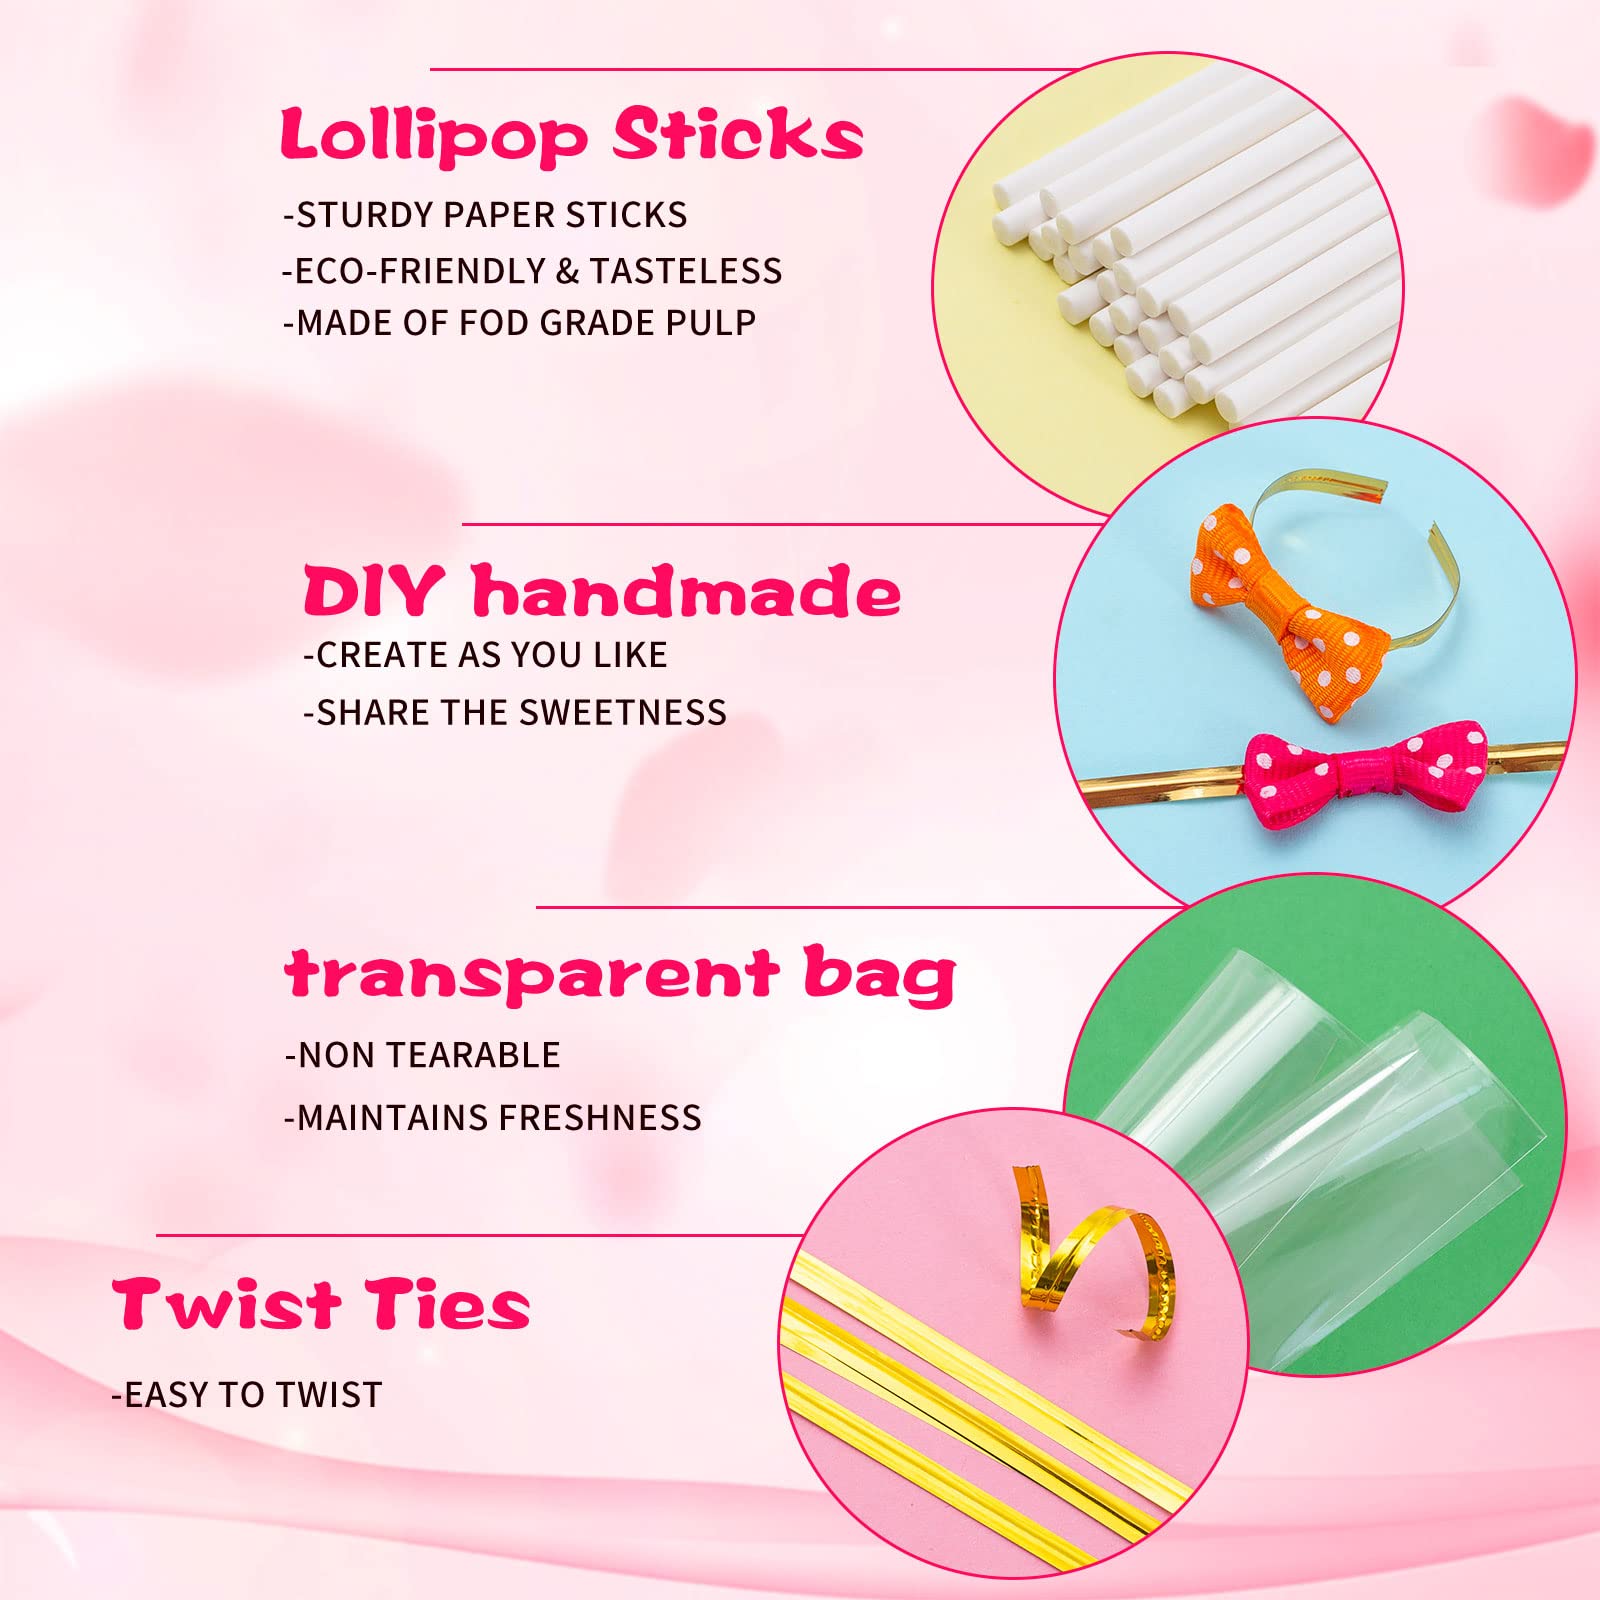 SOTMALTK 320Pcs Cake Pop Sticks and Wrappers Kit, Lollipop Sticks Cake Pop Bags with Metallic Twist Ties Bow, Perfect for Making Lollipops, Candies, Chocolates and Cookies - Great for Parties